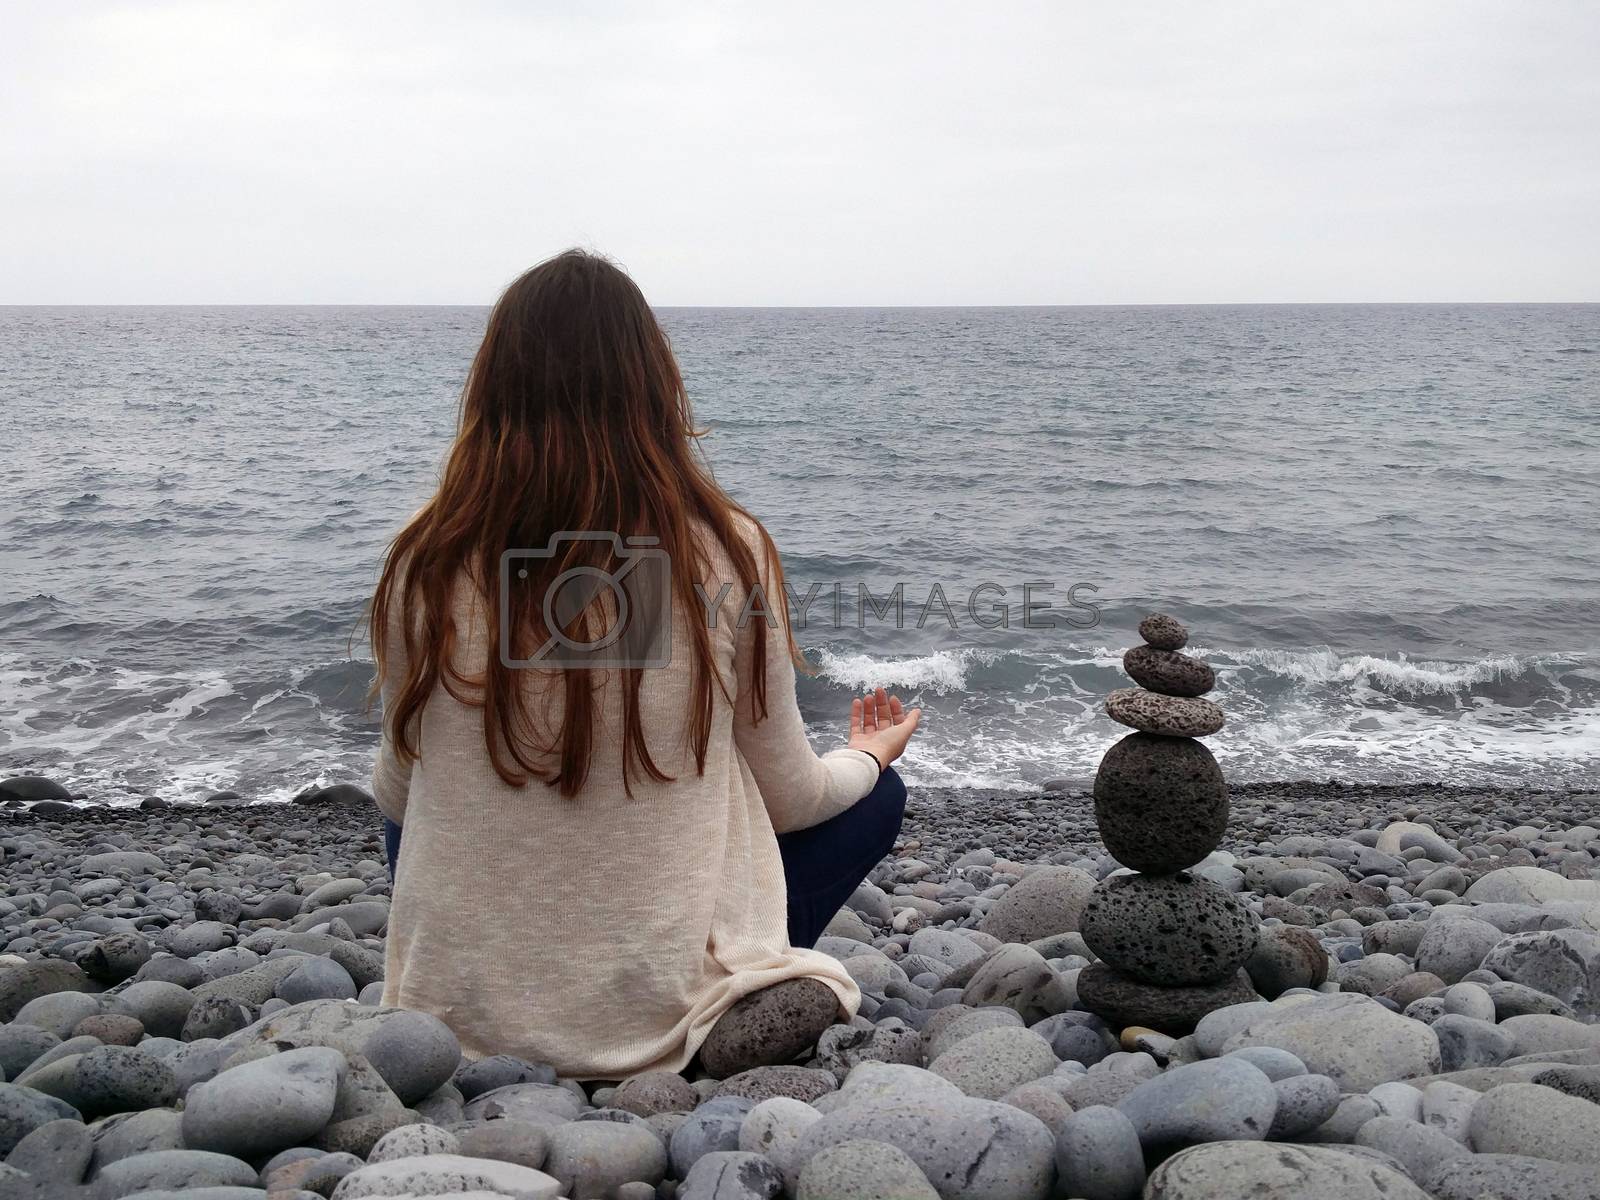 Royalty free image of girl meditating in beach by membio